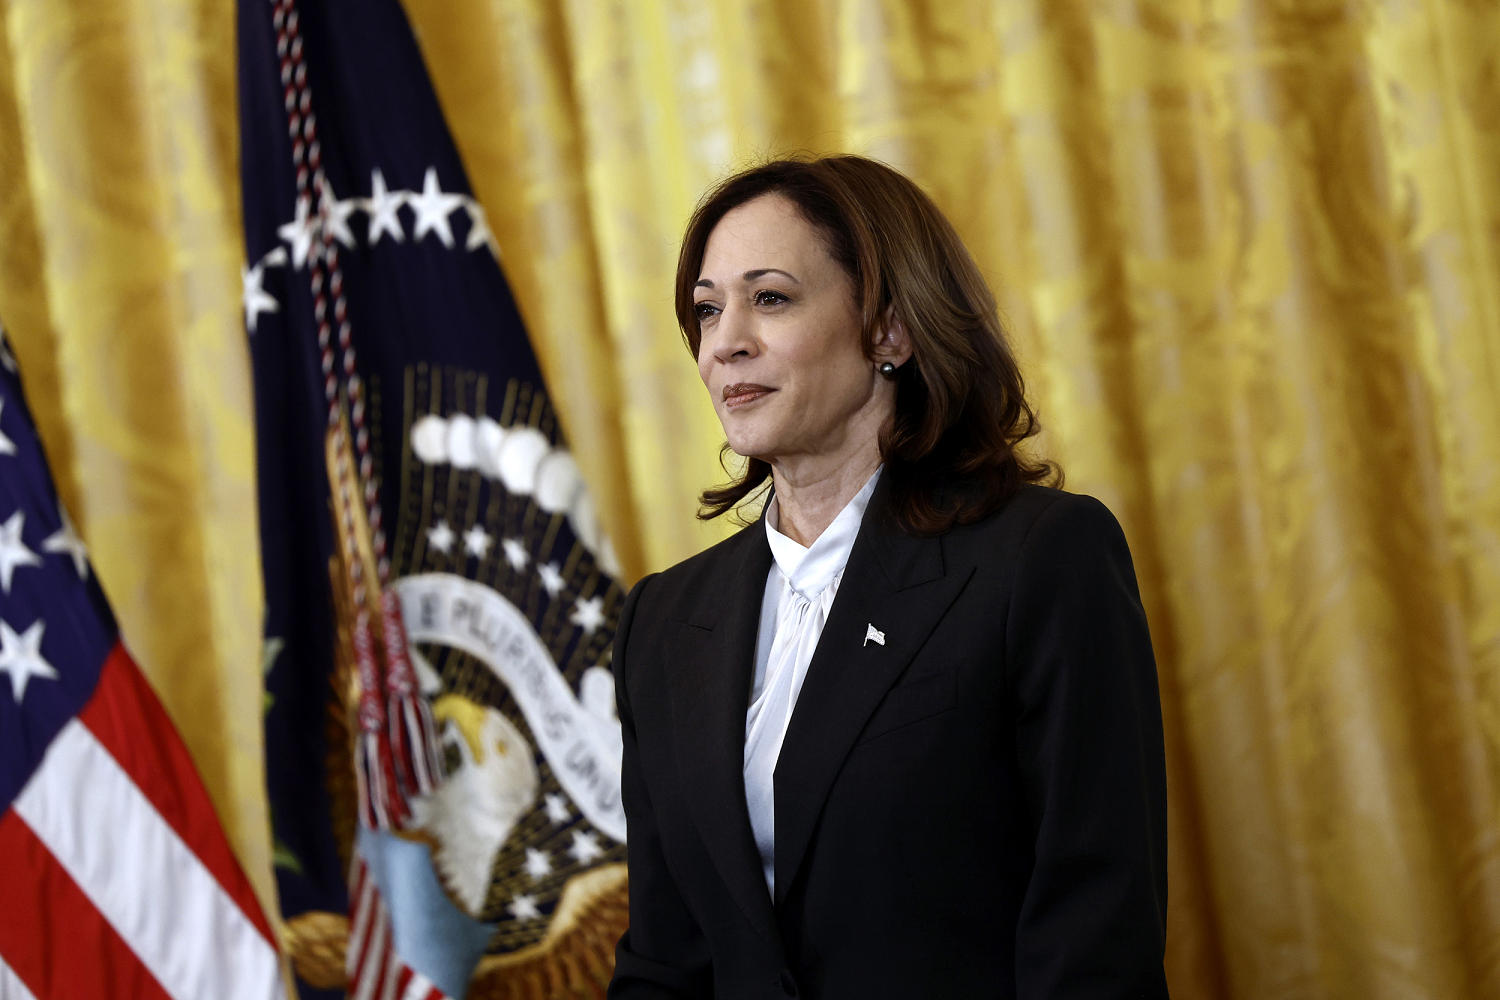 Republican attacks on Kamala Harris center on race and gender